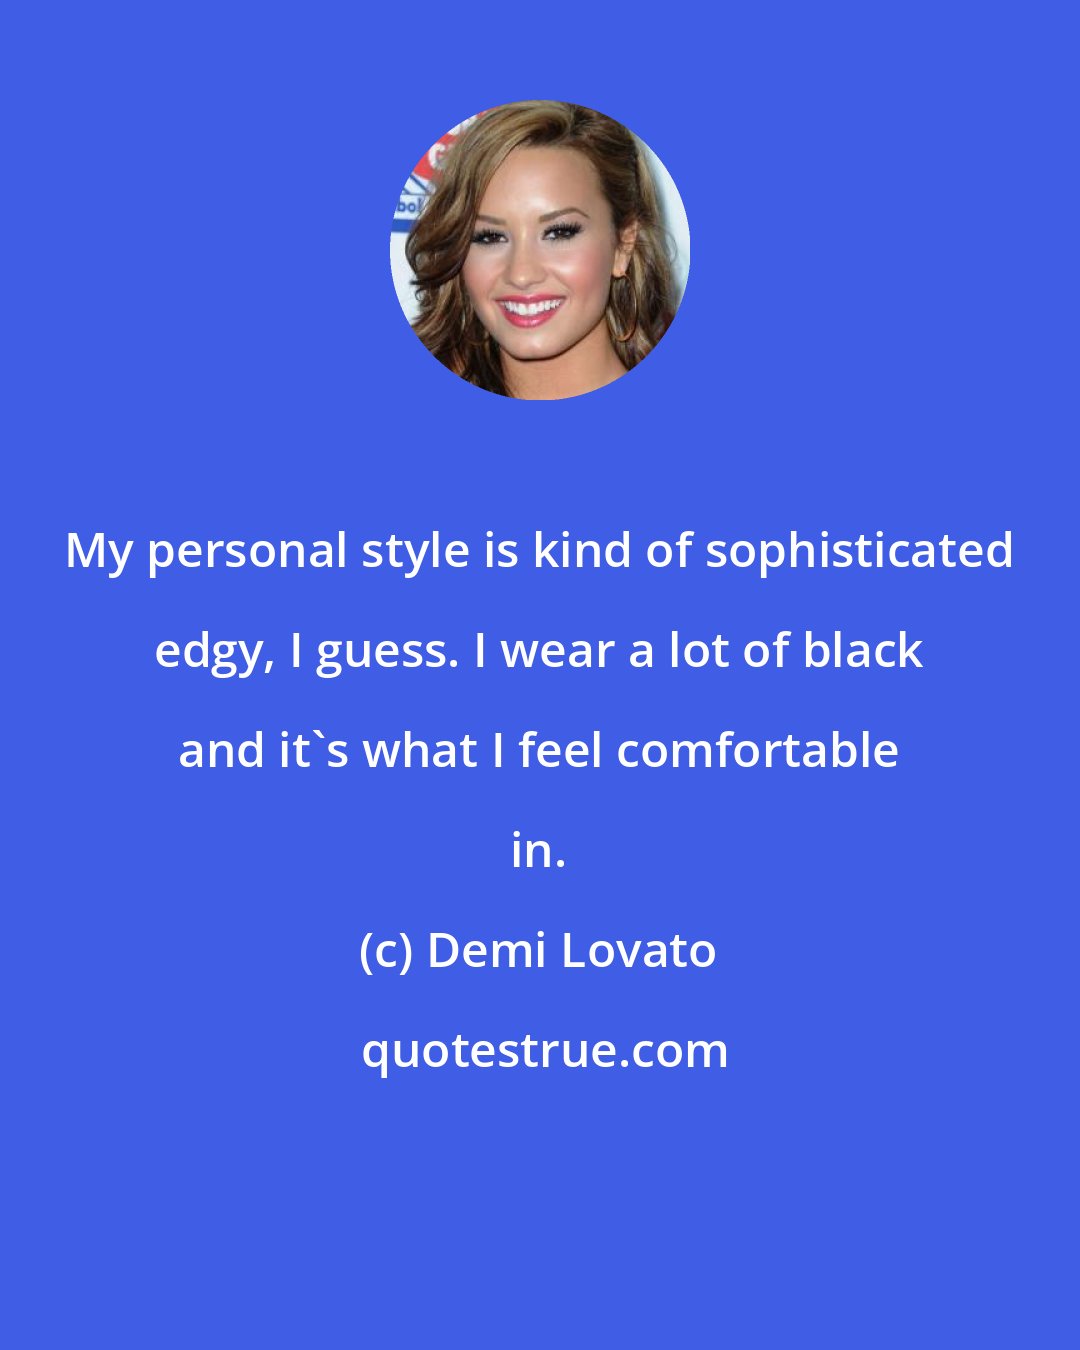 Demi Lovato: My personal style is kind of sophisticated edgy, I guess. I wear a lot of black and it's what I feel comfortable in.